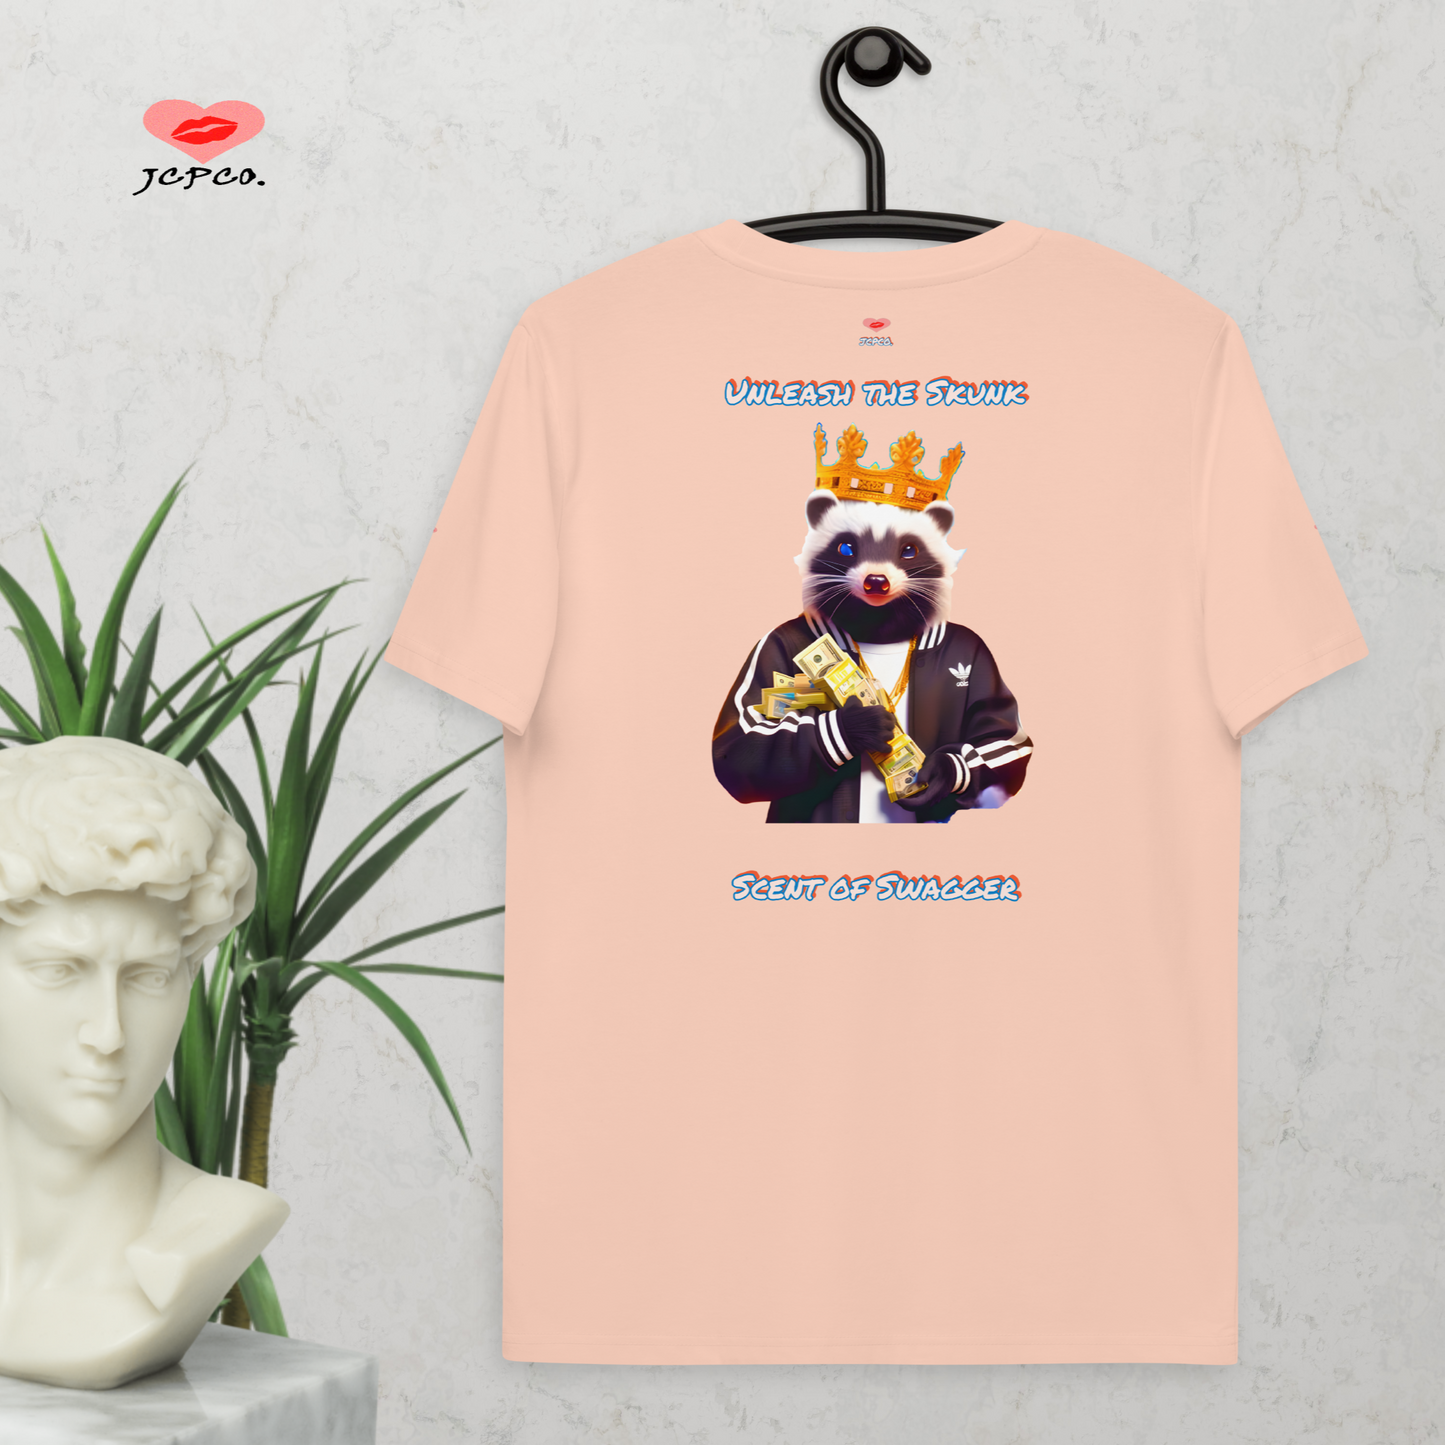 👑Unleash the Skunk🦨 Scent of Swagger Skunk Royalty💎 Unisex organic cotton t-shirt👕